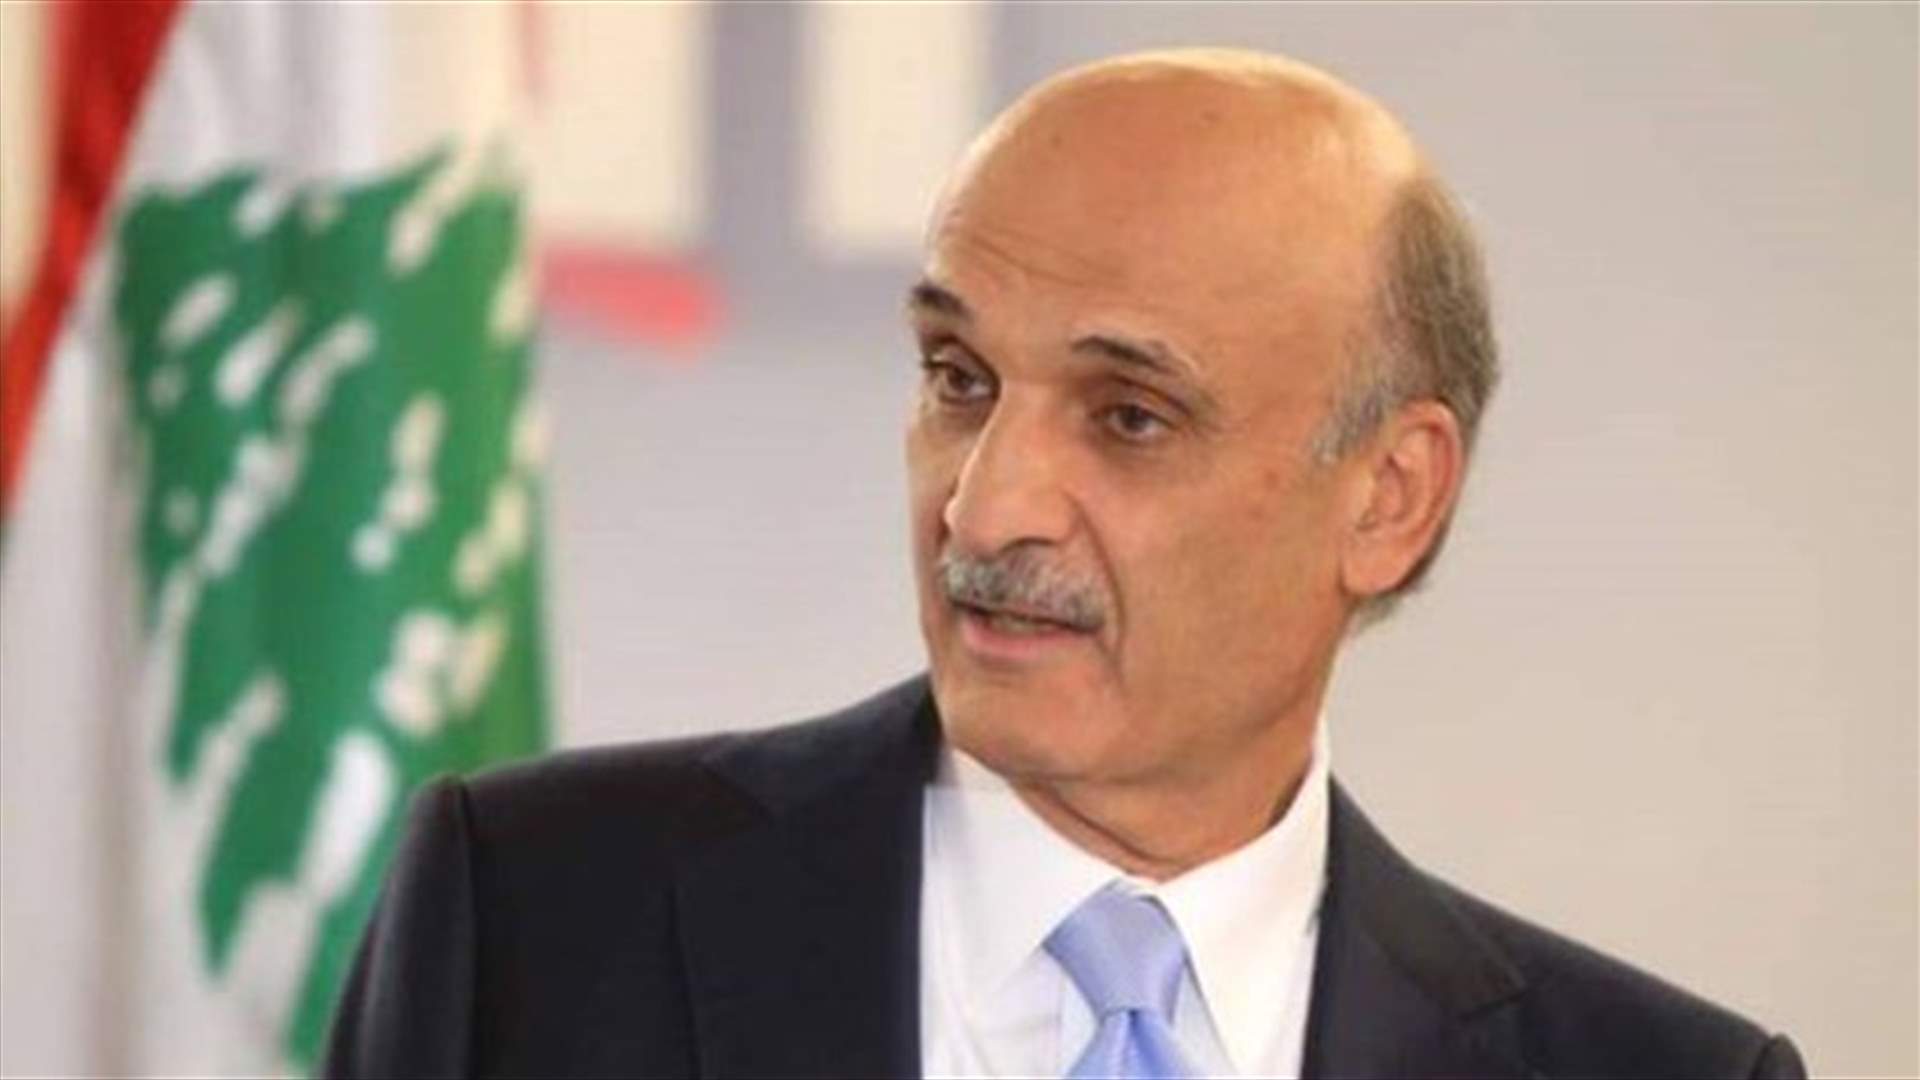 Boosted by Lebanon vote, Geagea eyes Hezbollah and reform